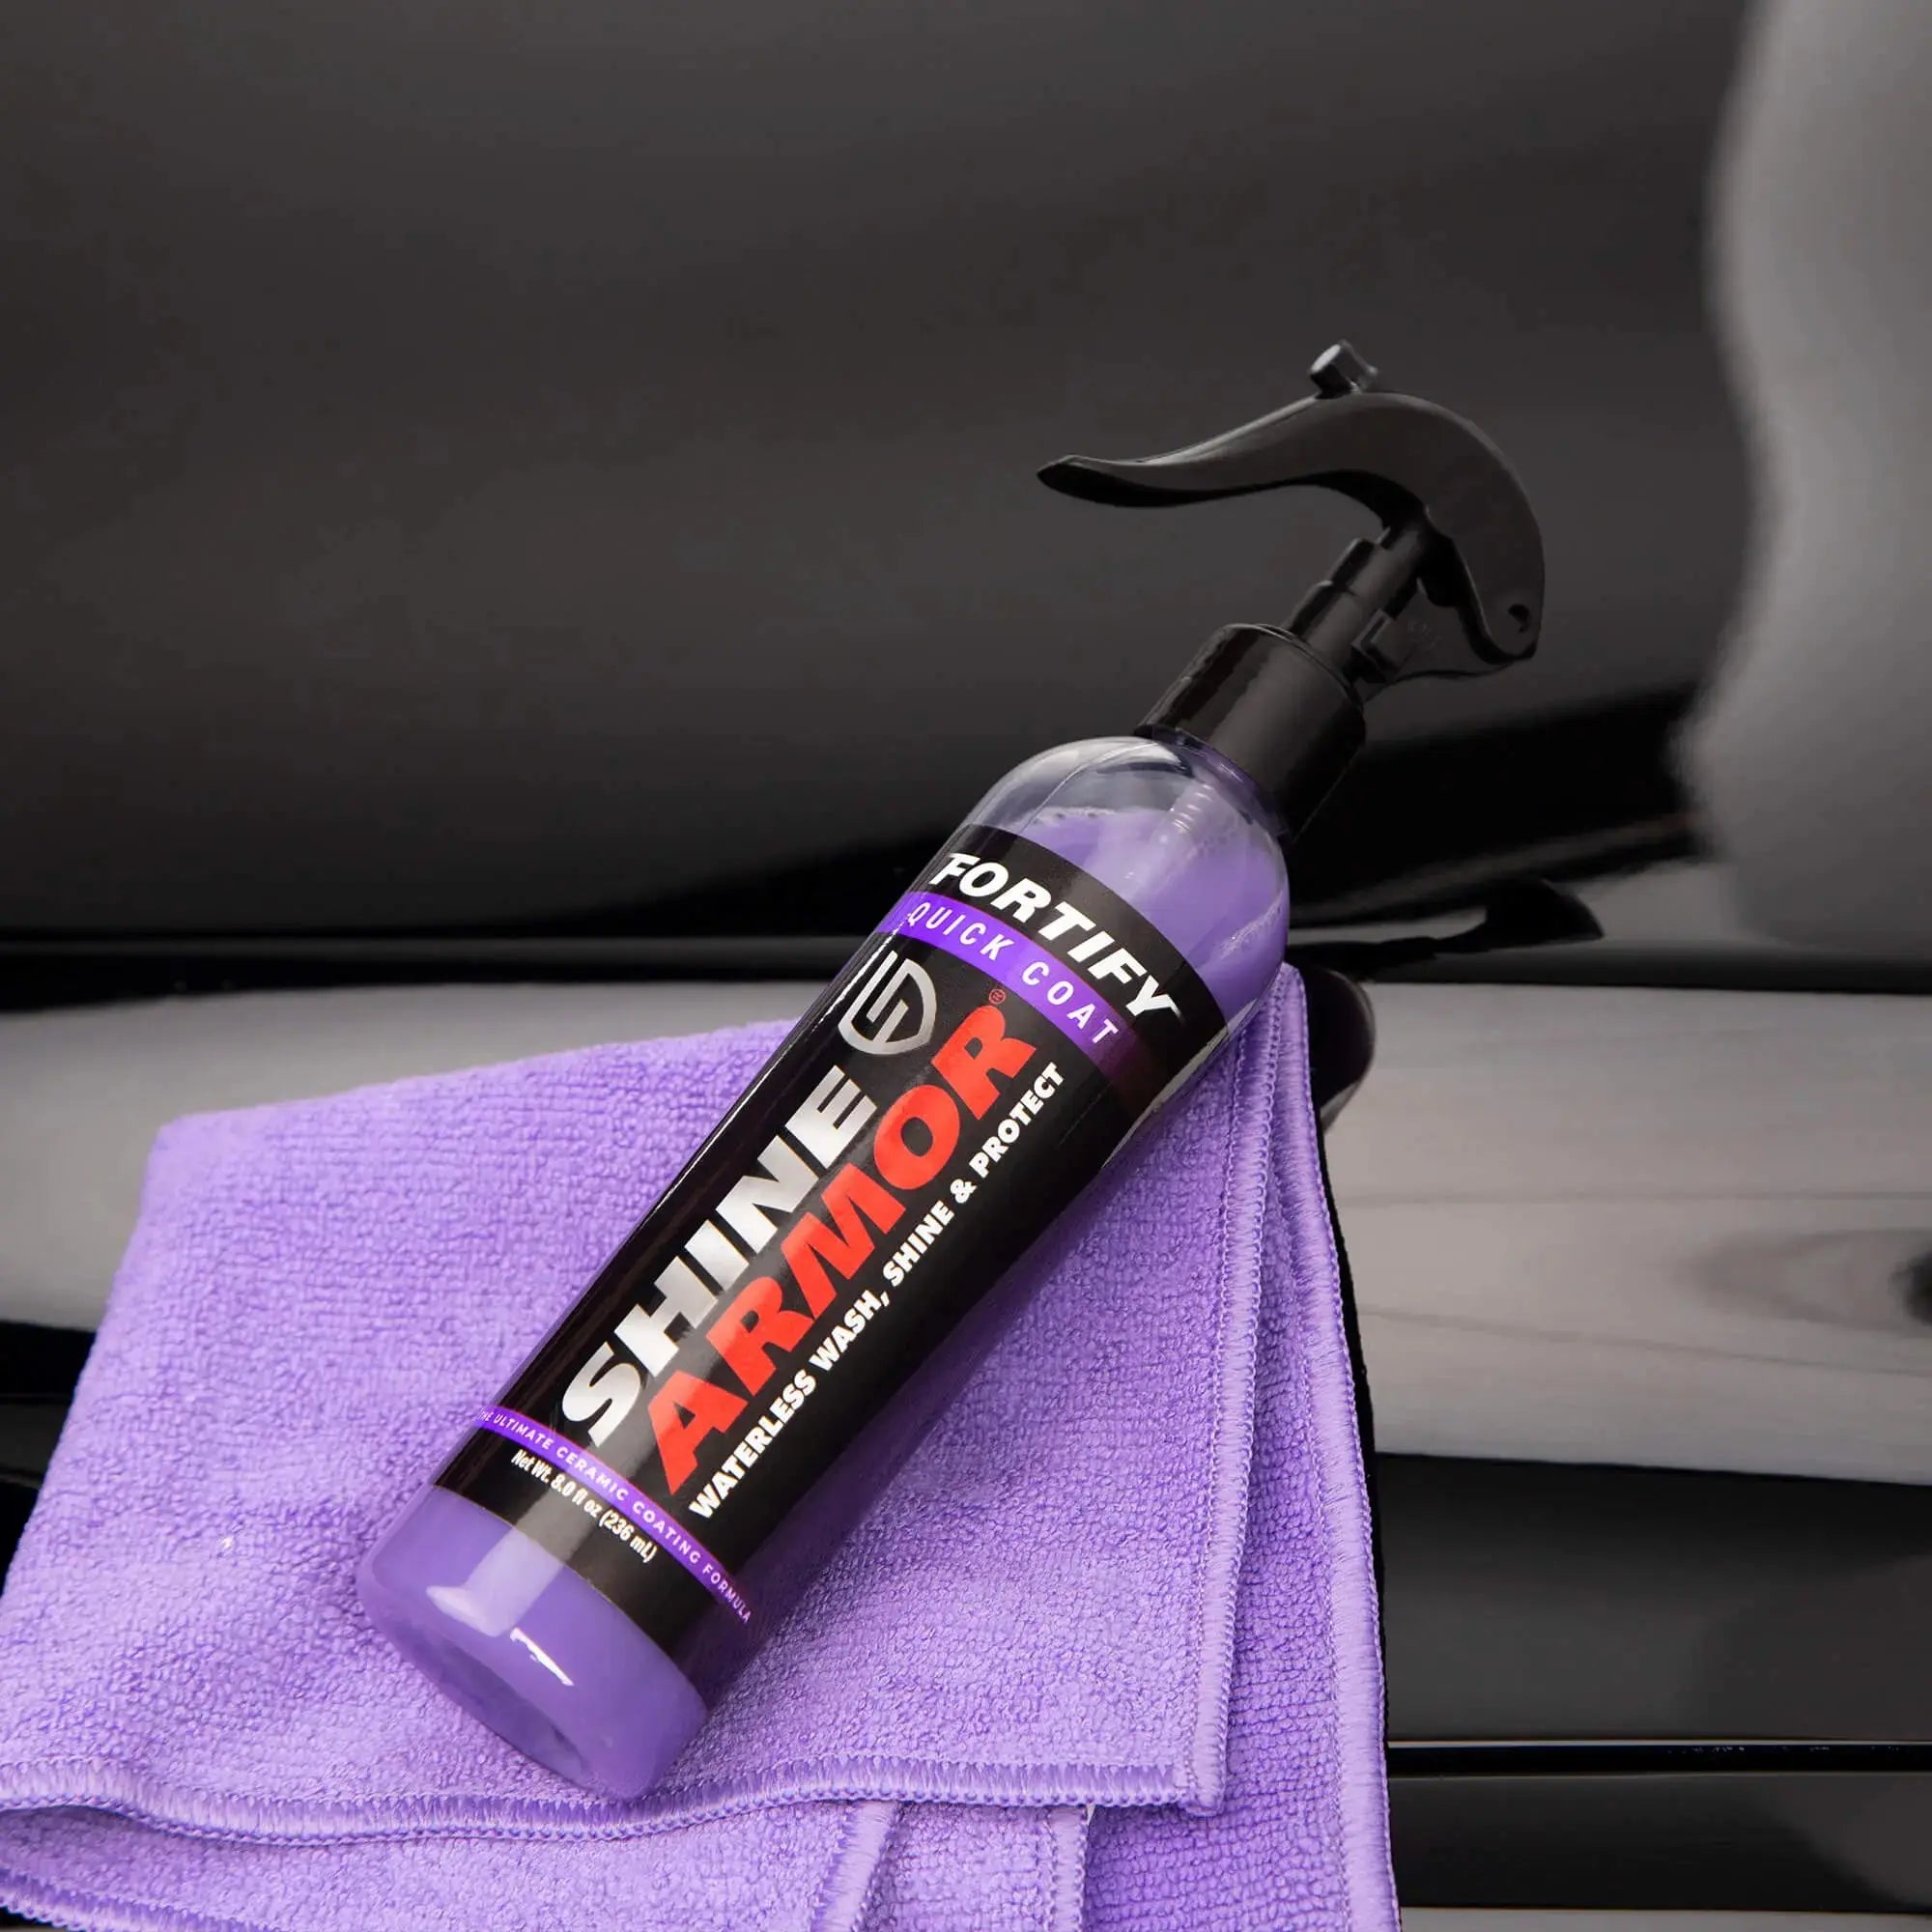 3 in 1 High Protection Quick Car Coating Spray, Ceramic Coating Fortify  Quick Coat Car Shield Coatin